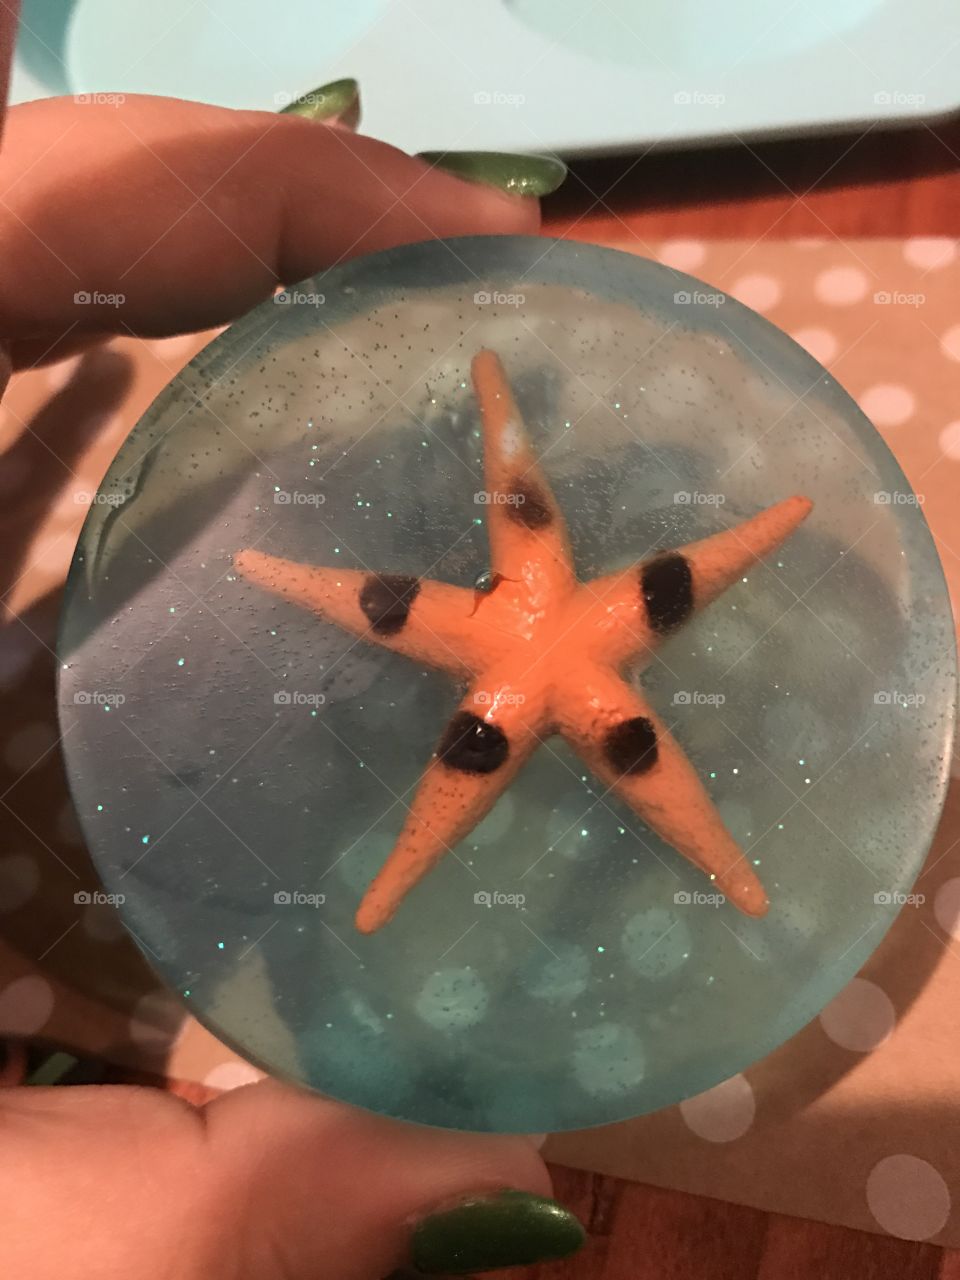 Homemade bath soap with toy inside